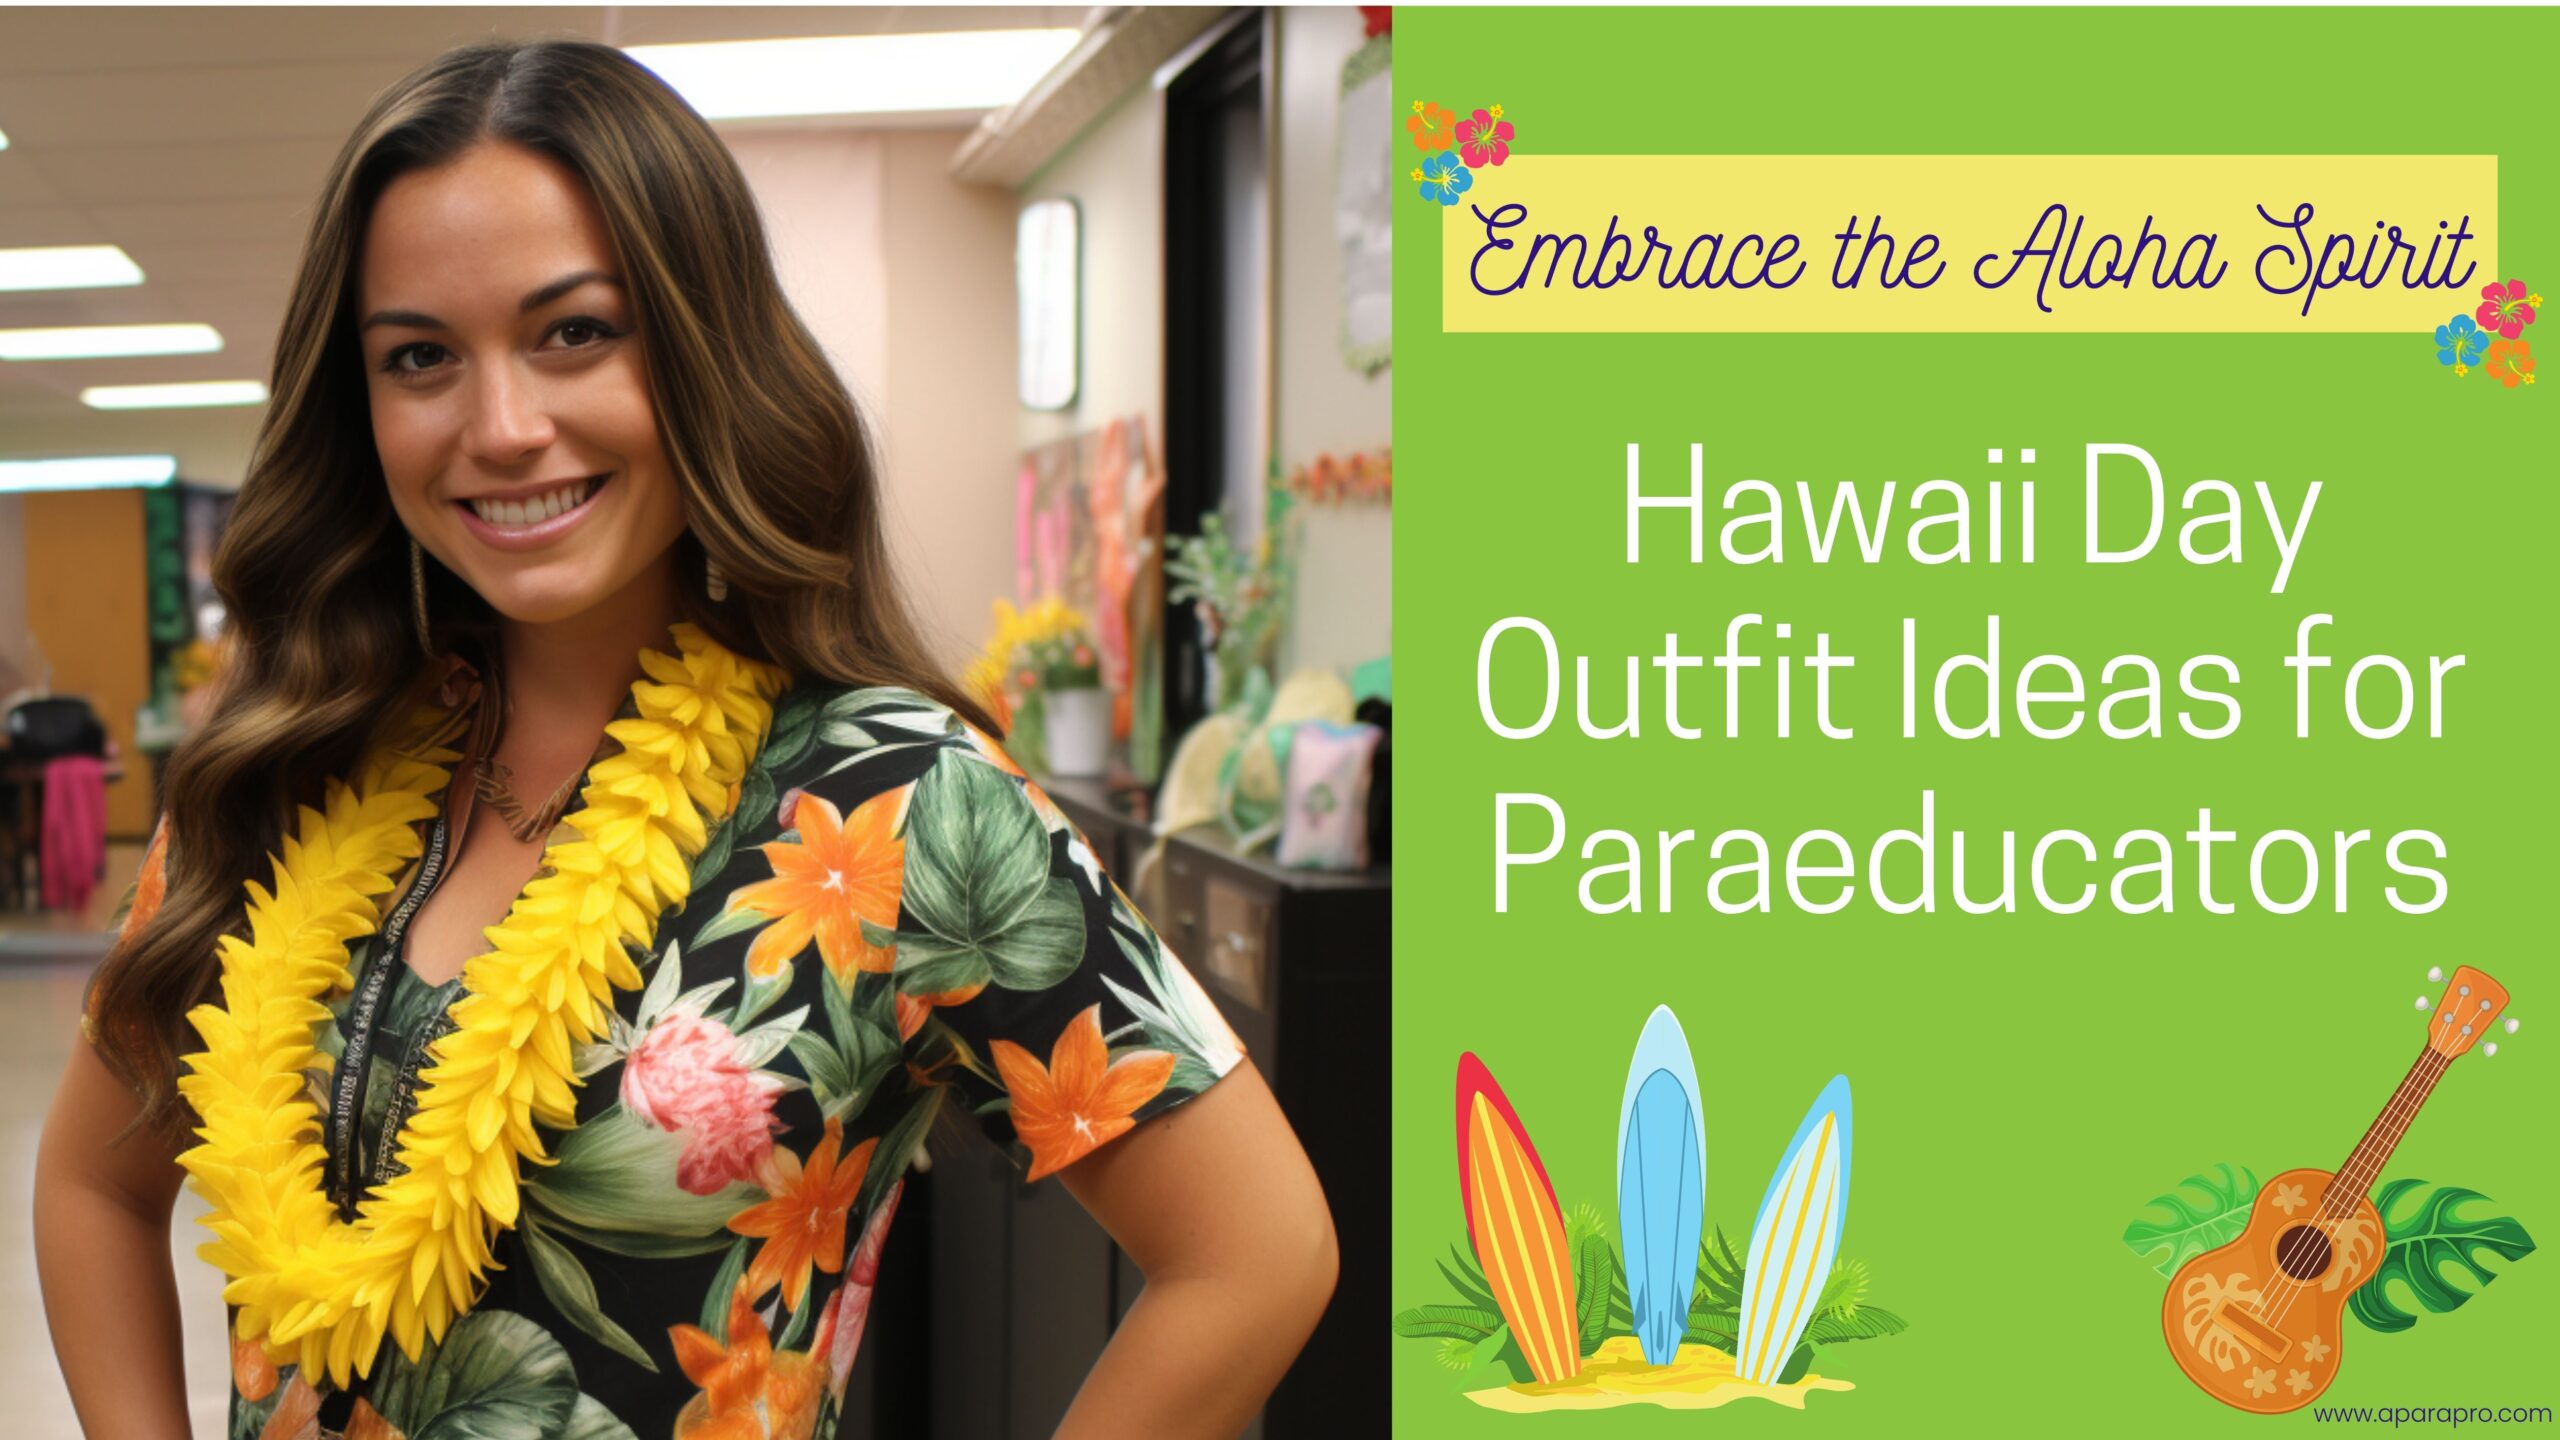 hawaii day outfit ideas for paraeducators - a para pro